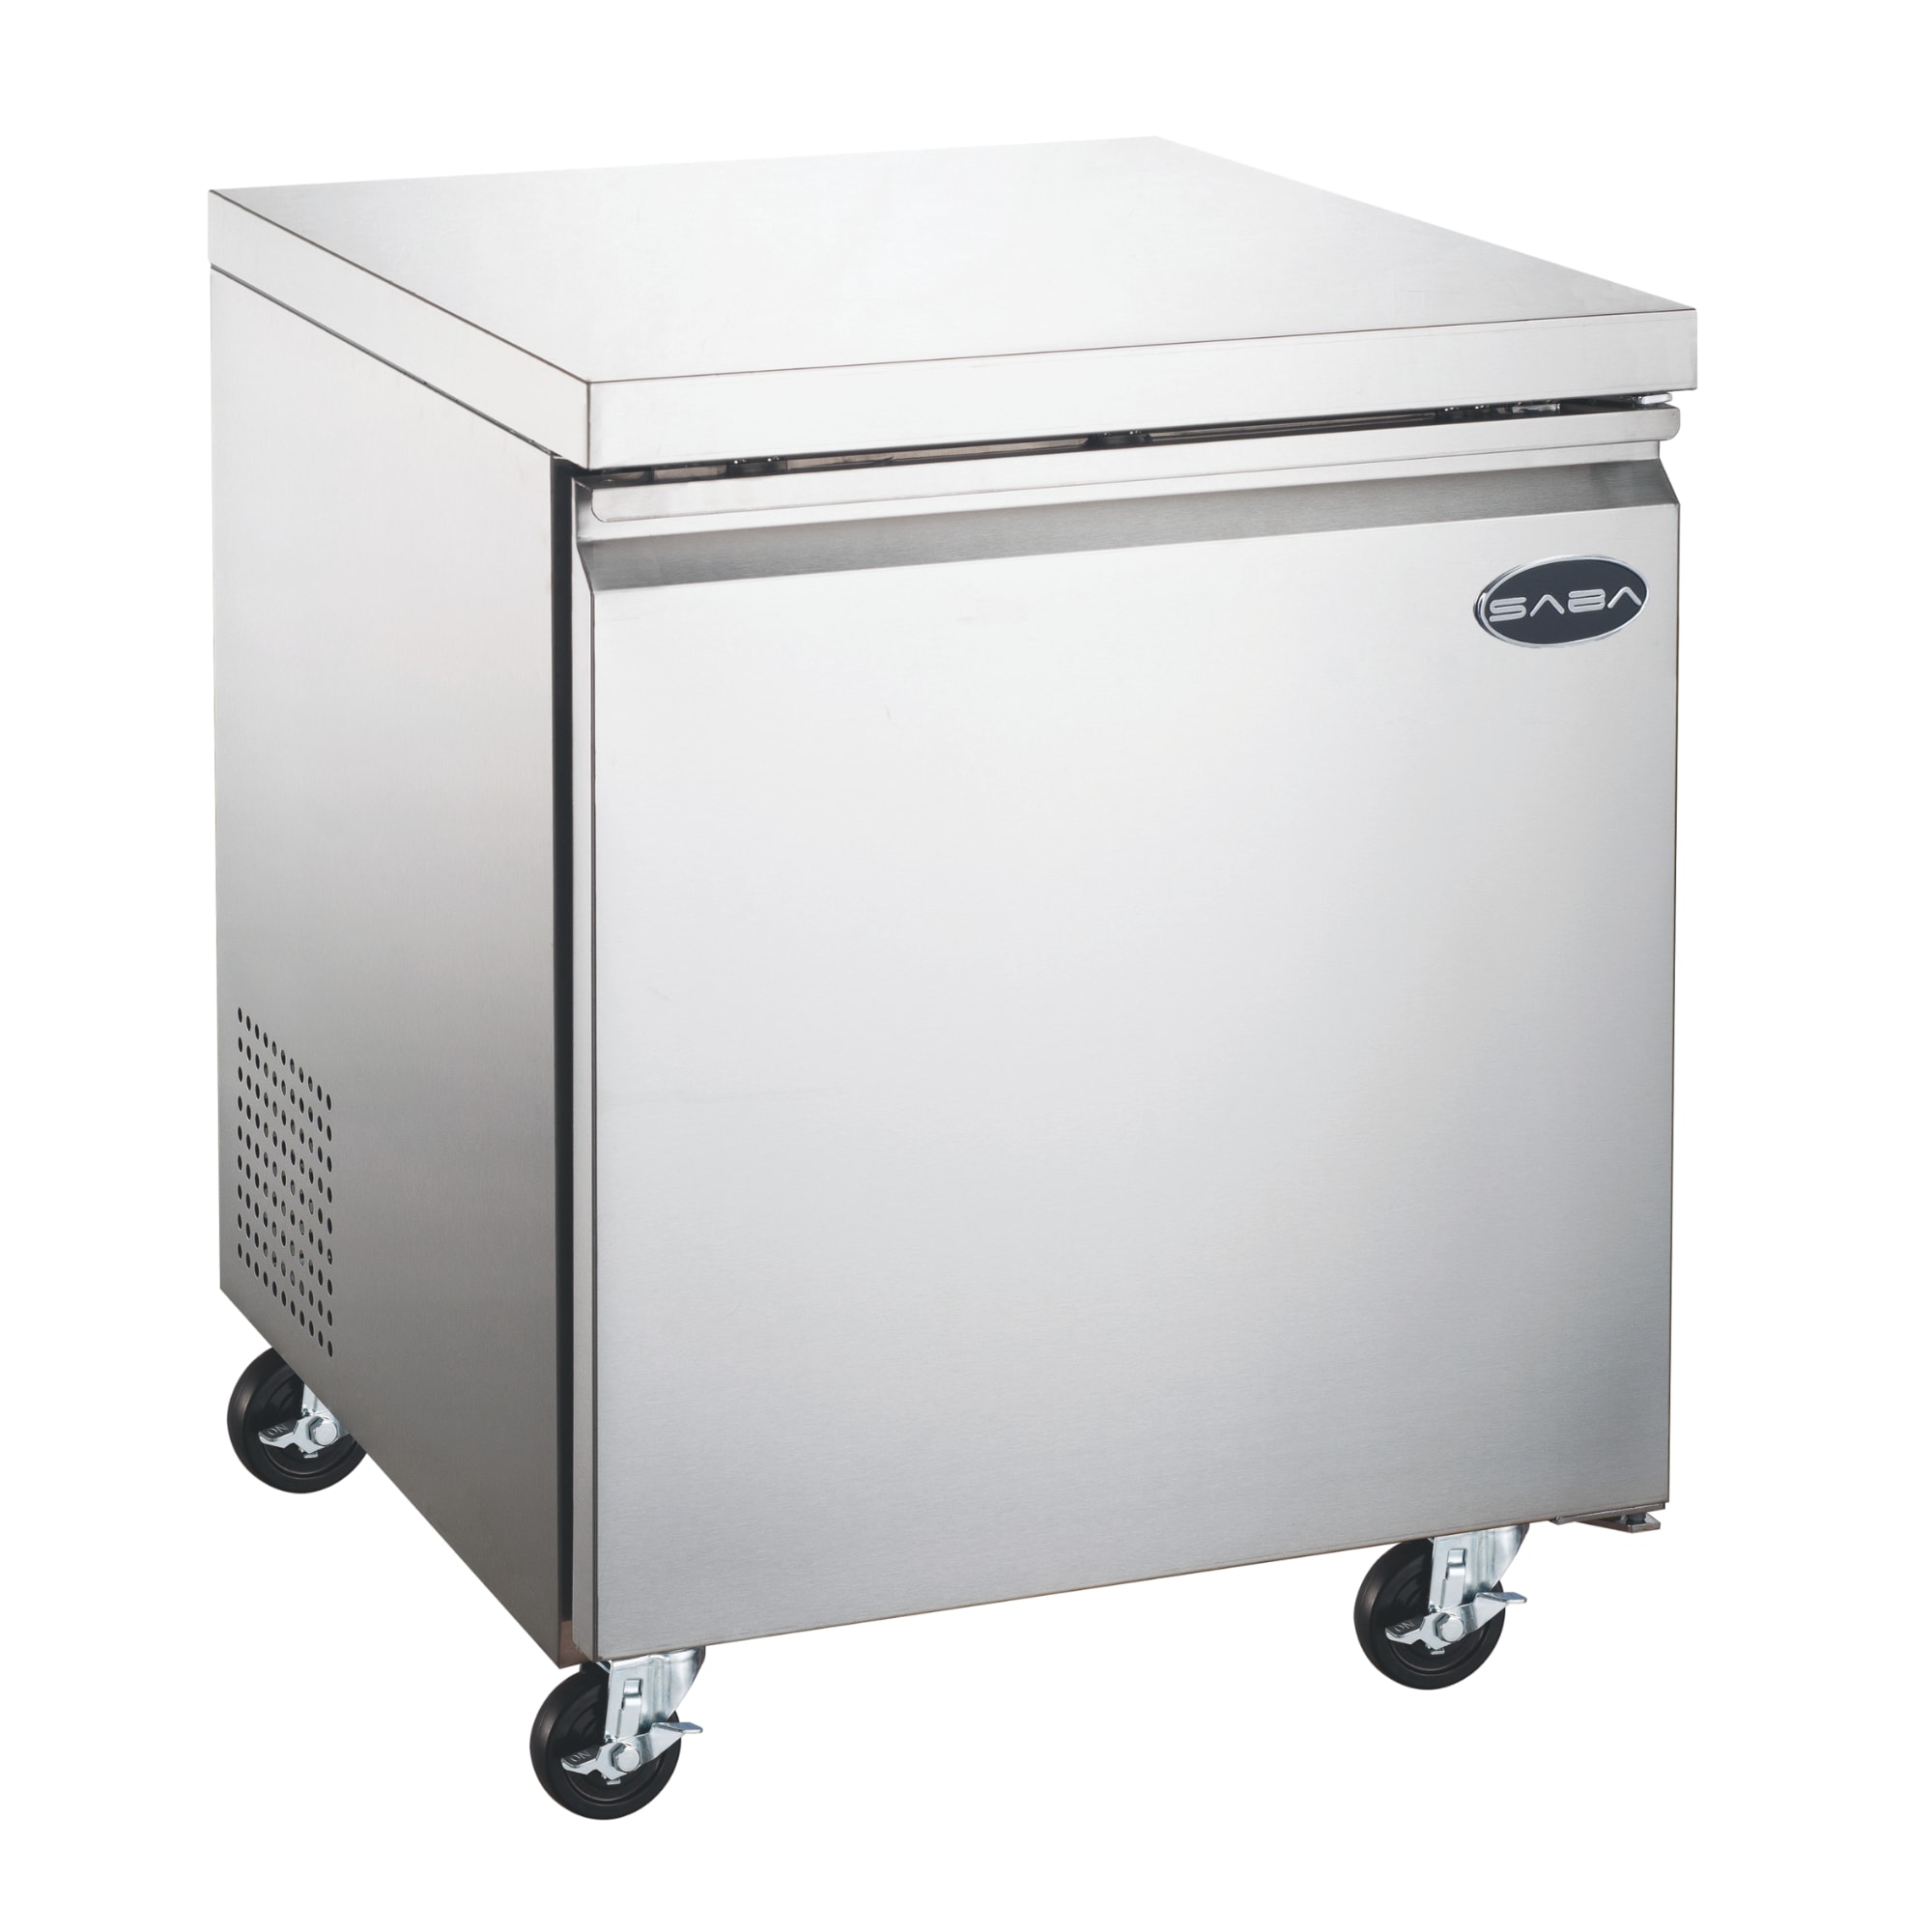 30ºC laboratory 10 cu.ft. chest freezer with stainless steel